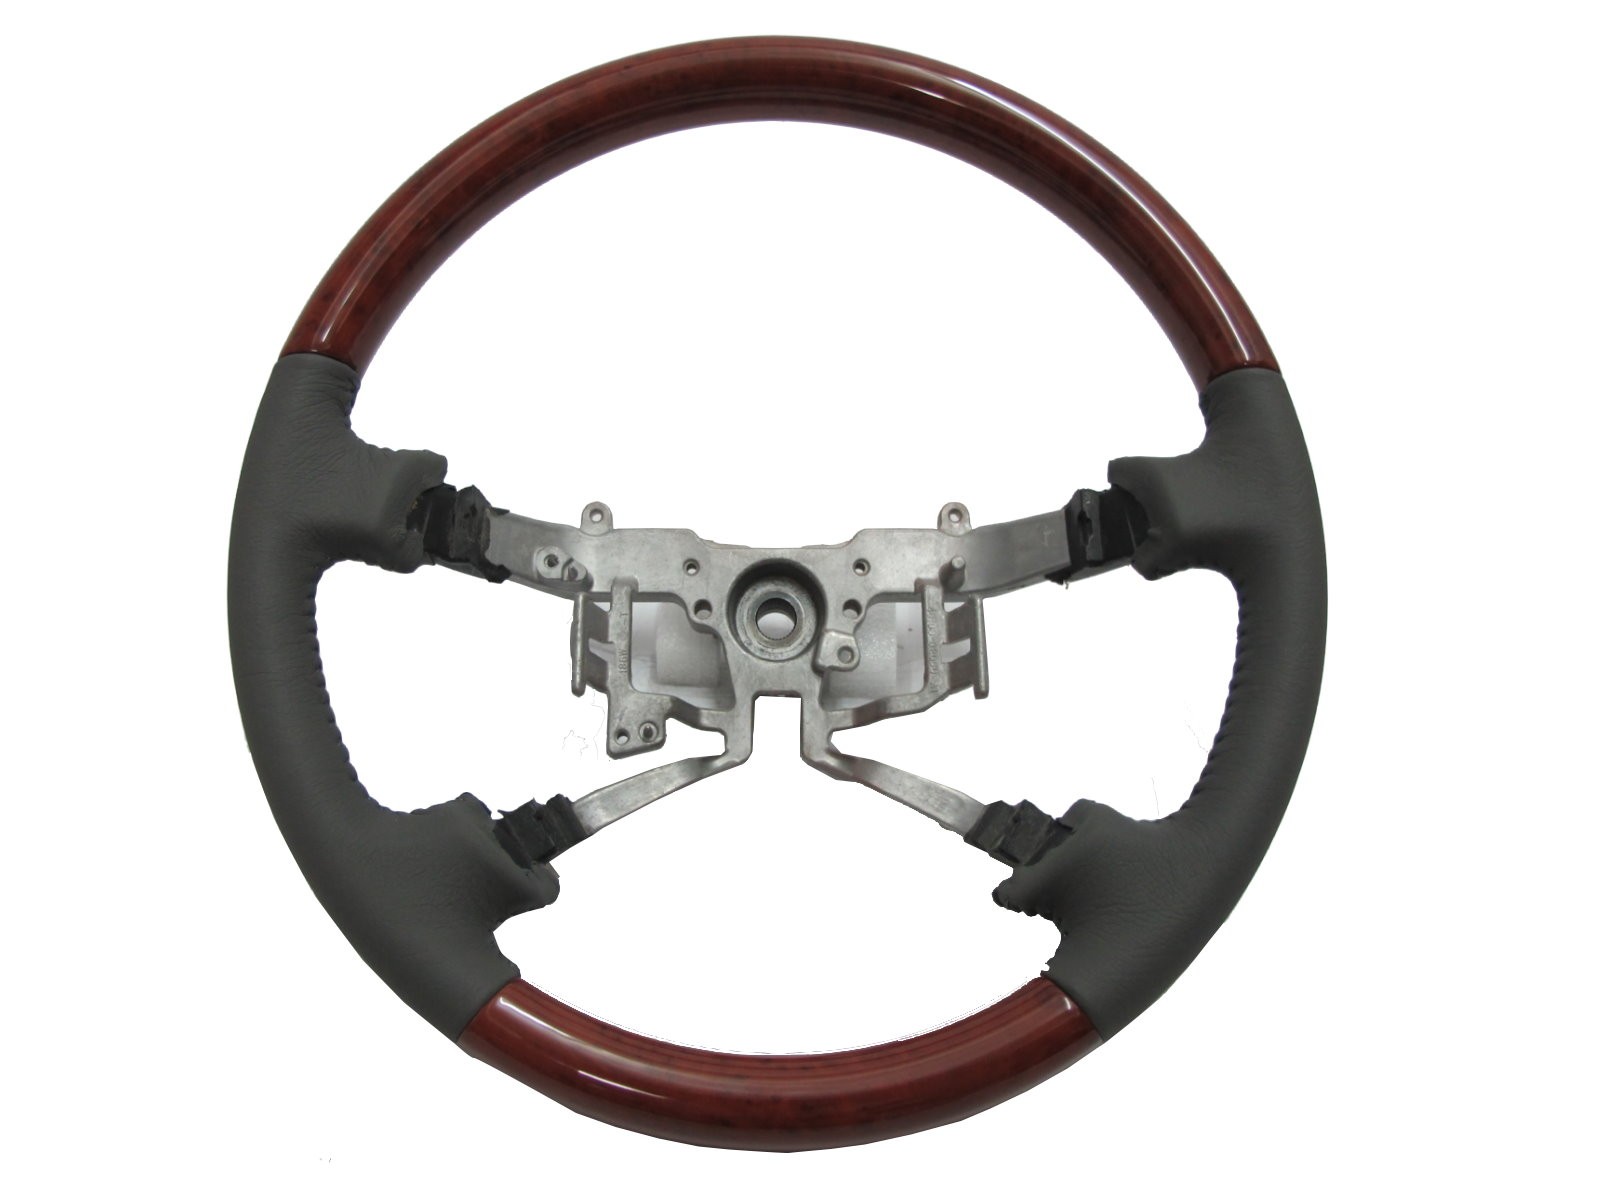 CrazyTheGod FORTUNER 2006-2011 STEERING WHEEL OE CLASSIC WOOD GRAY Leather for TOYOTA